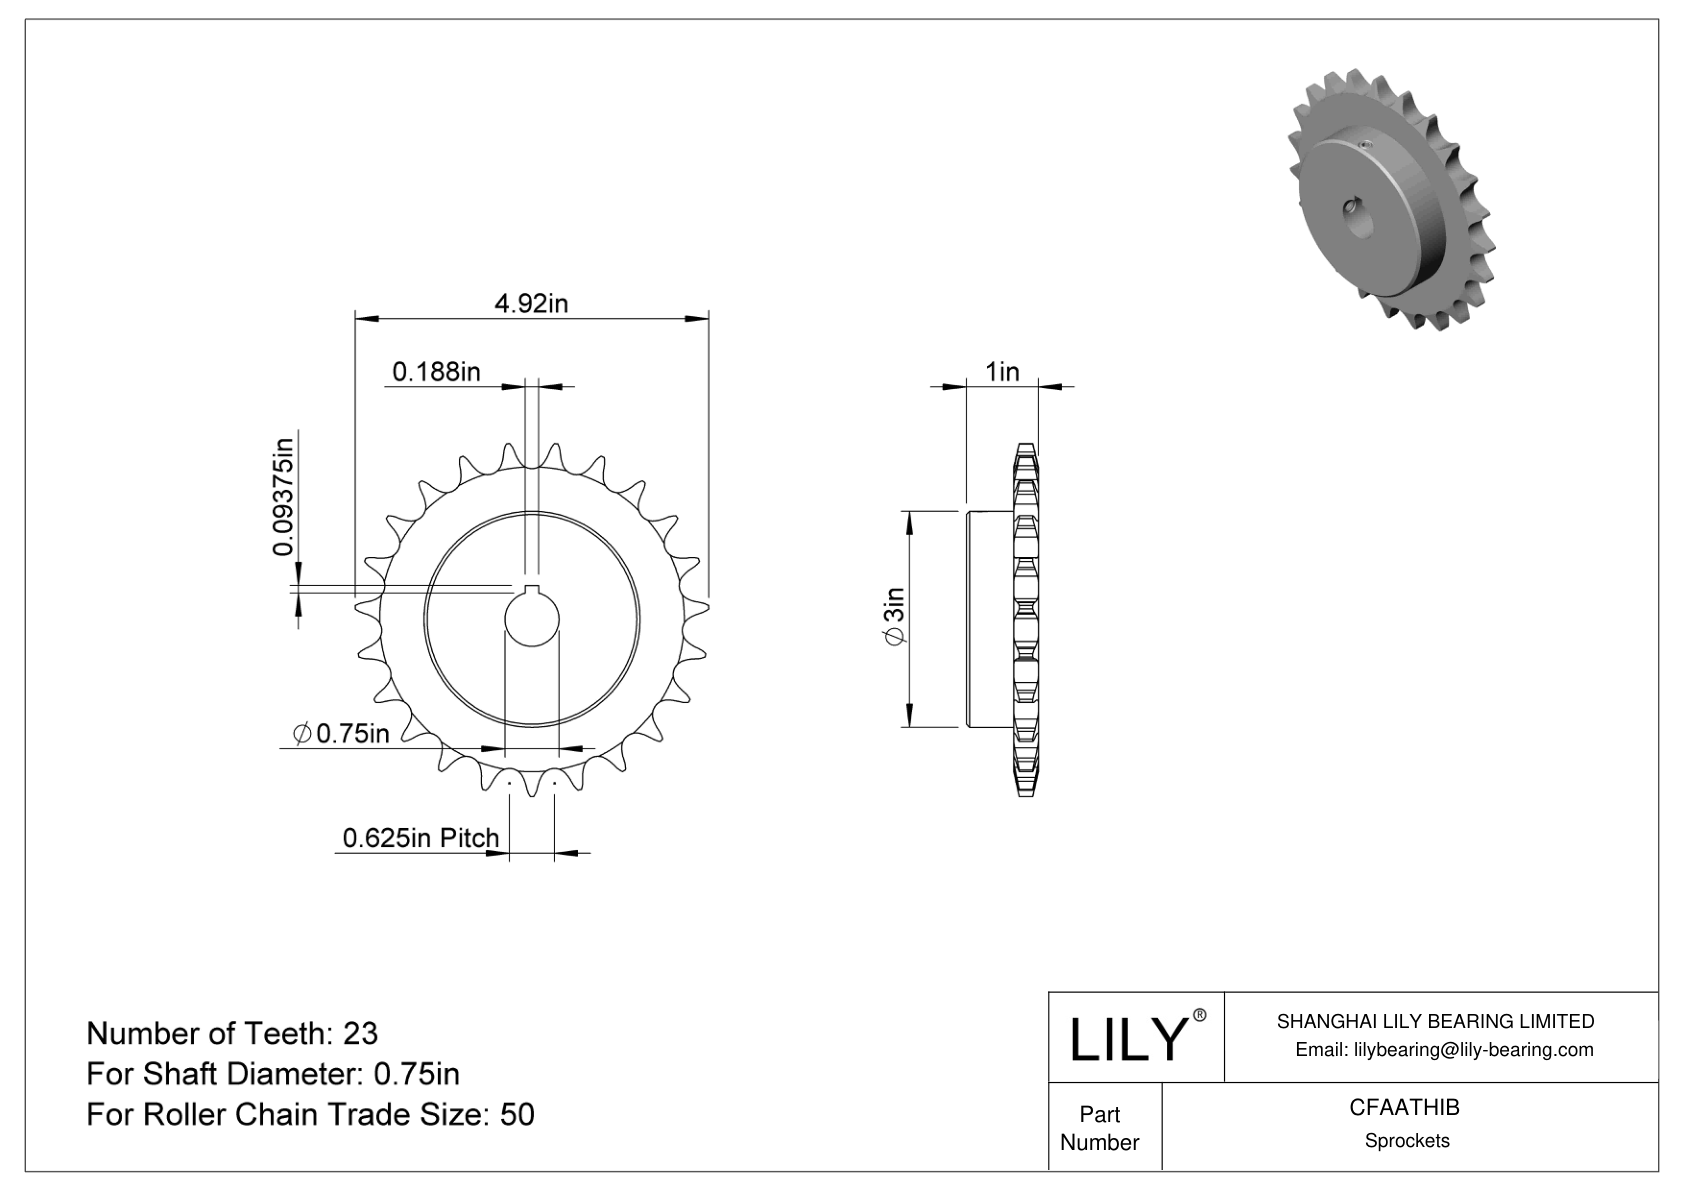 CFAATHIB Wear-Resistant Sprockets for ANSI Roller Chain cad drawing